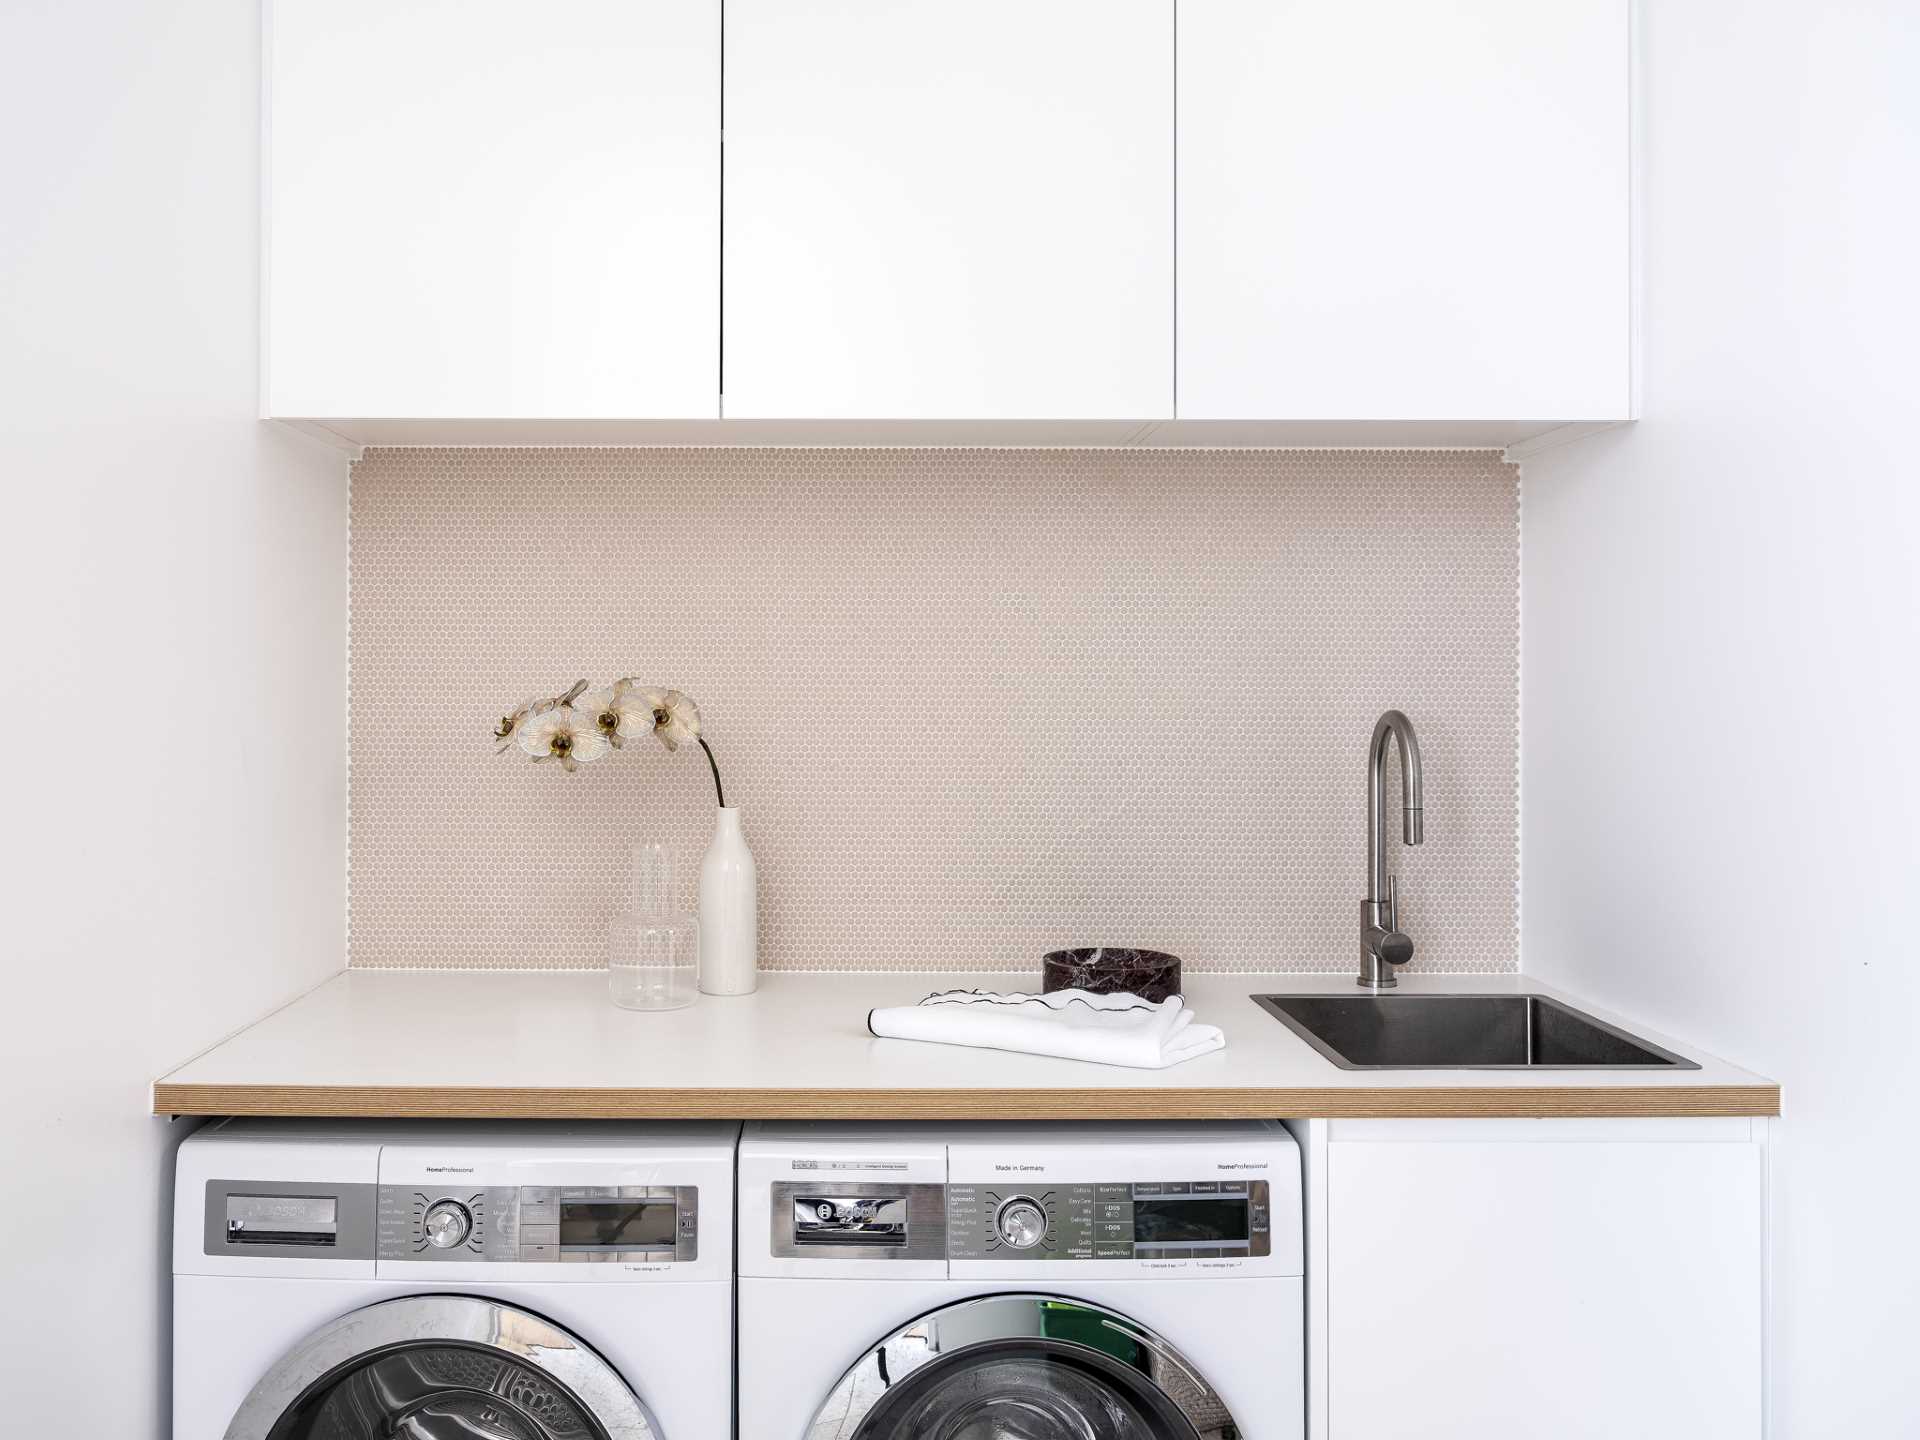 In this laundry room, a counter has been placed across the washing machine and dryer, creating a place for folding clothes, while cabinets add storage.